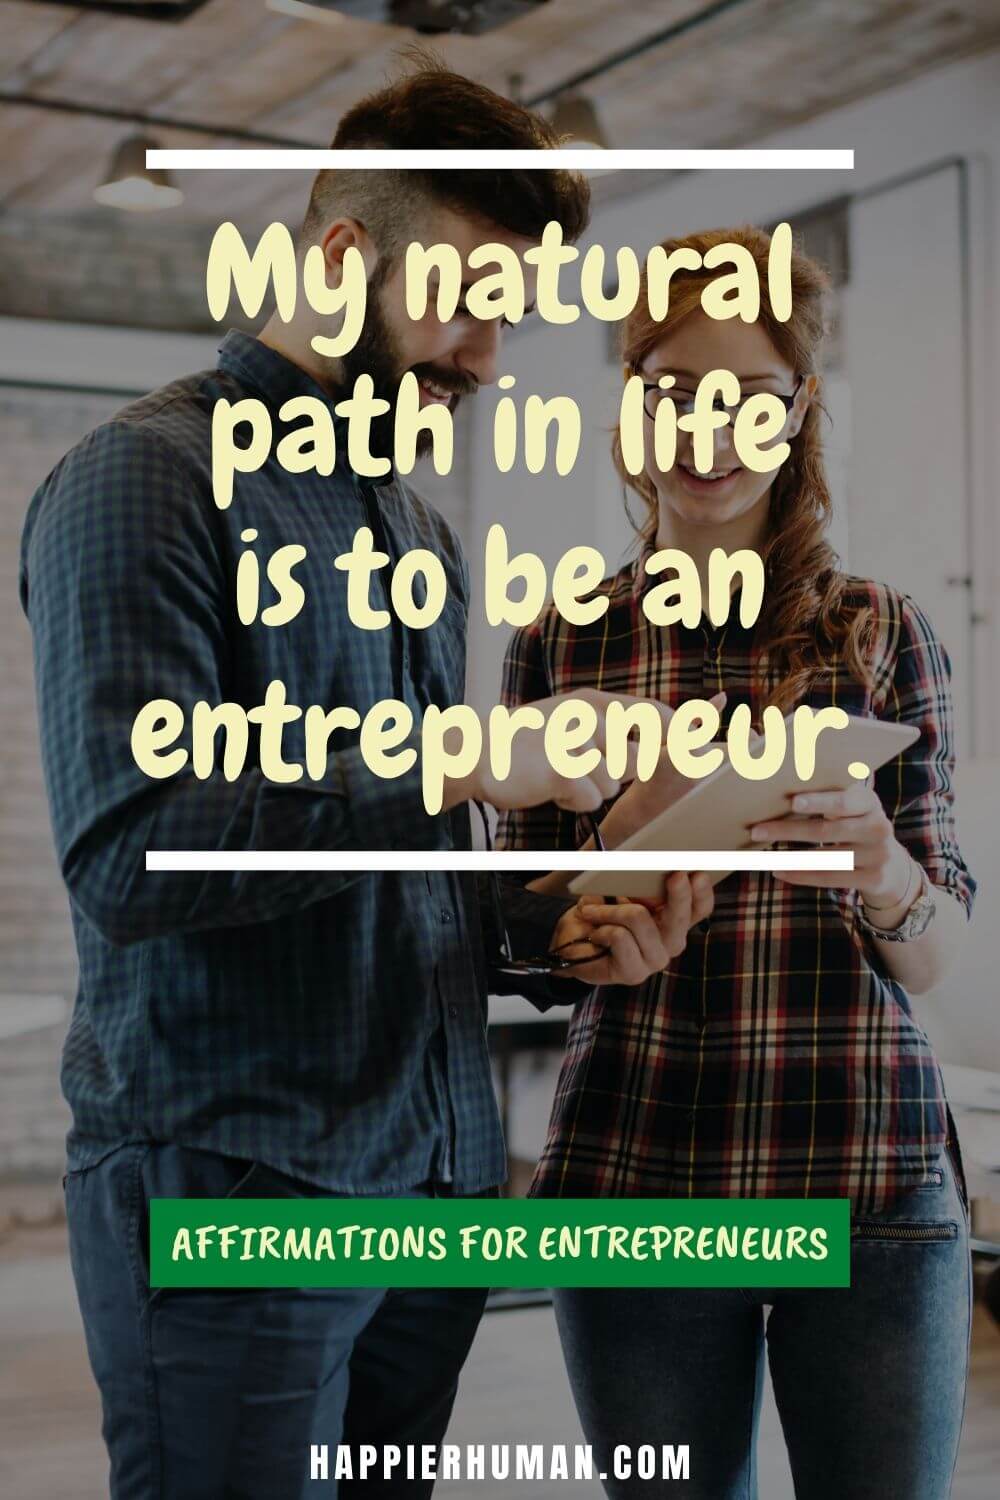 affirmations for entrepreneurs - My natural path in life is to be an entrepreneur. | affirmations for work success | spiritual business affirmations | business affirmations pdf